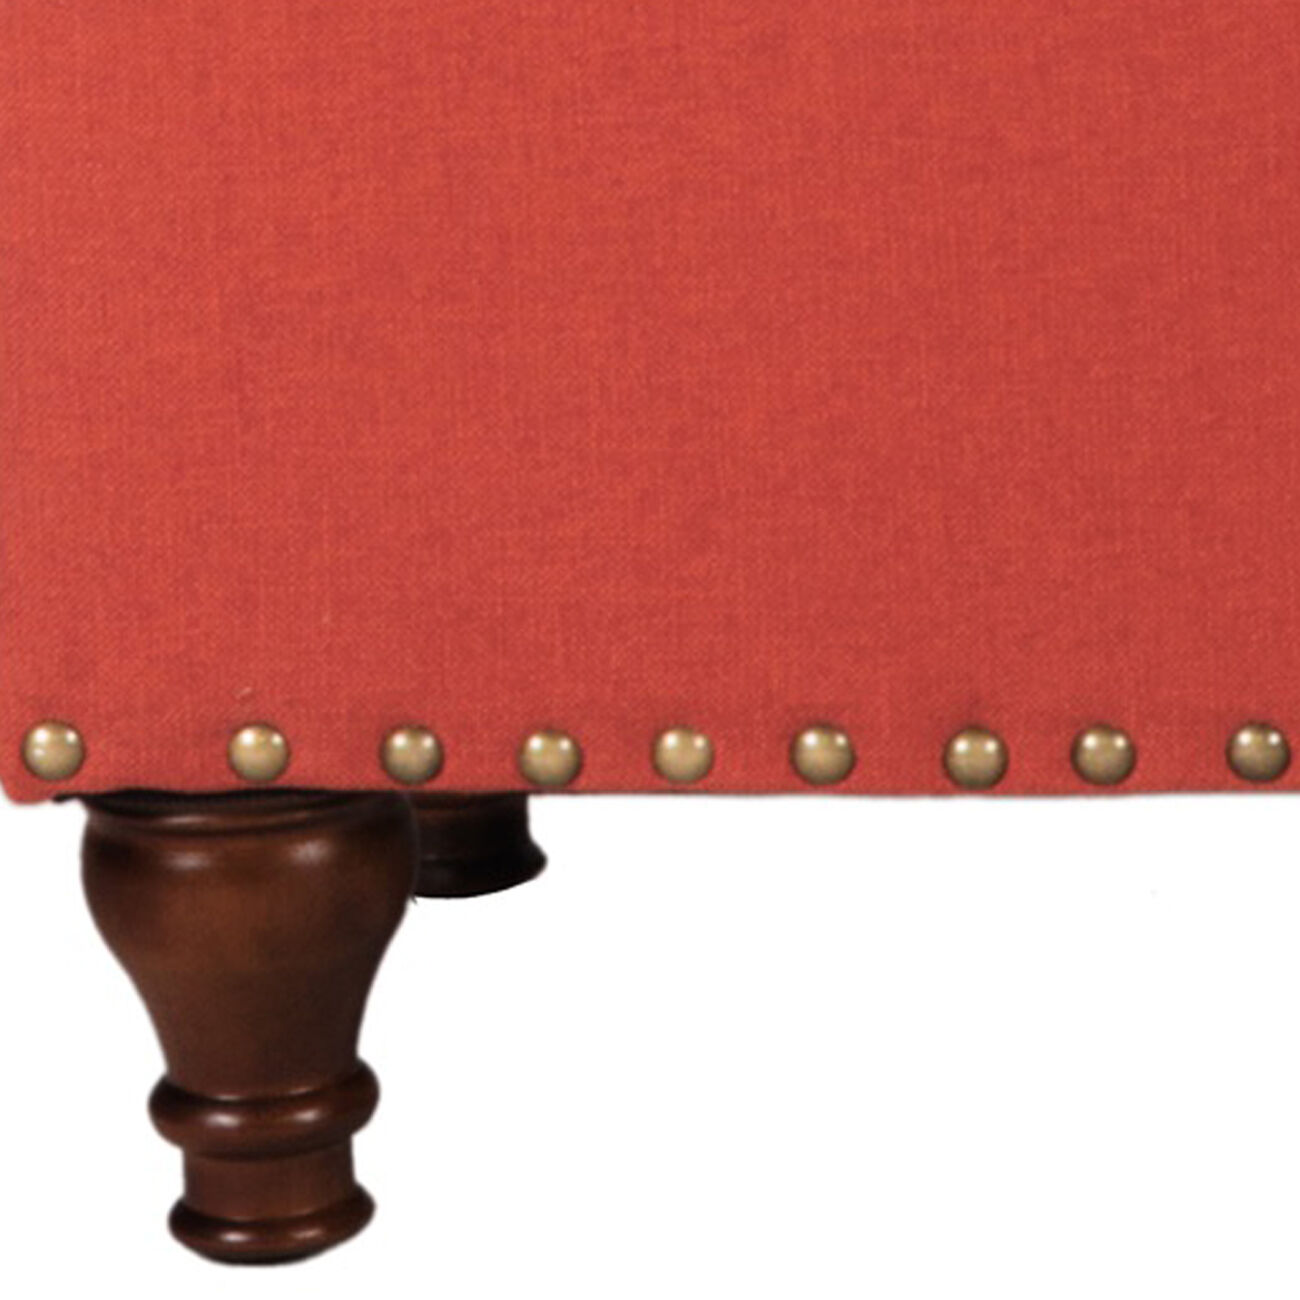 Fabric Upholstered Wooden Storage Bench With Nail head Trim, Large, Orange and Brown